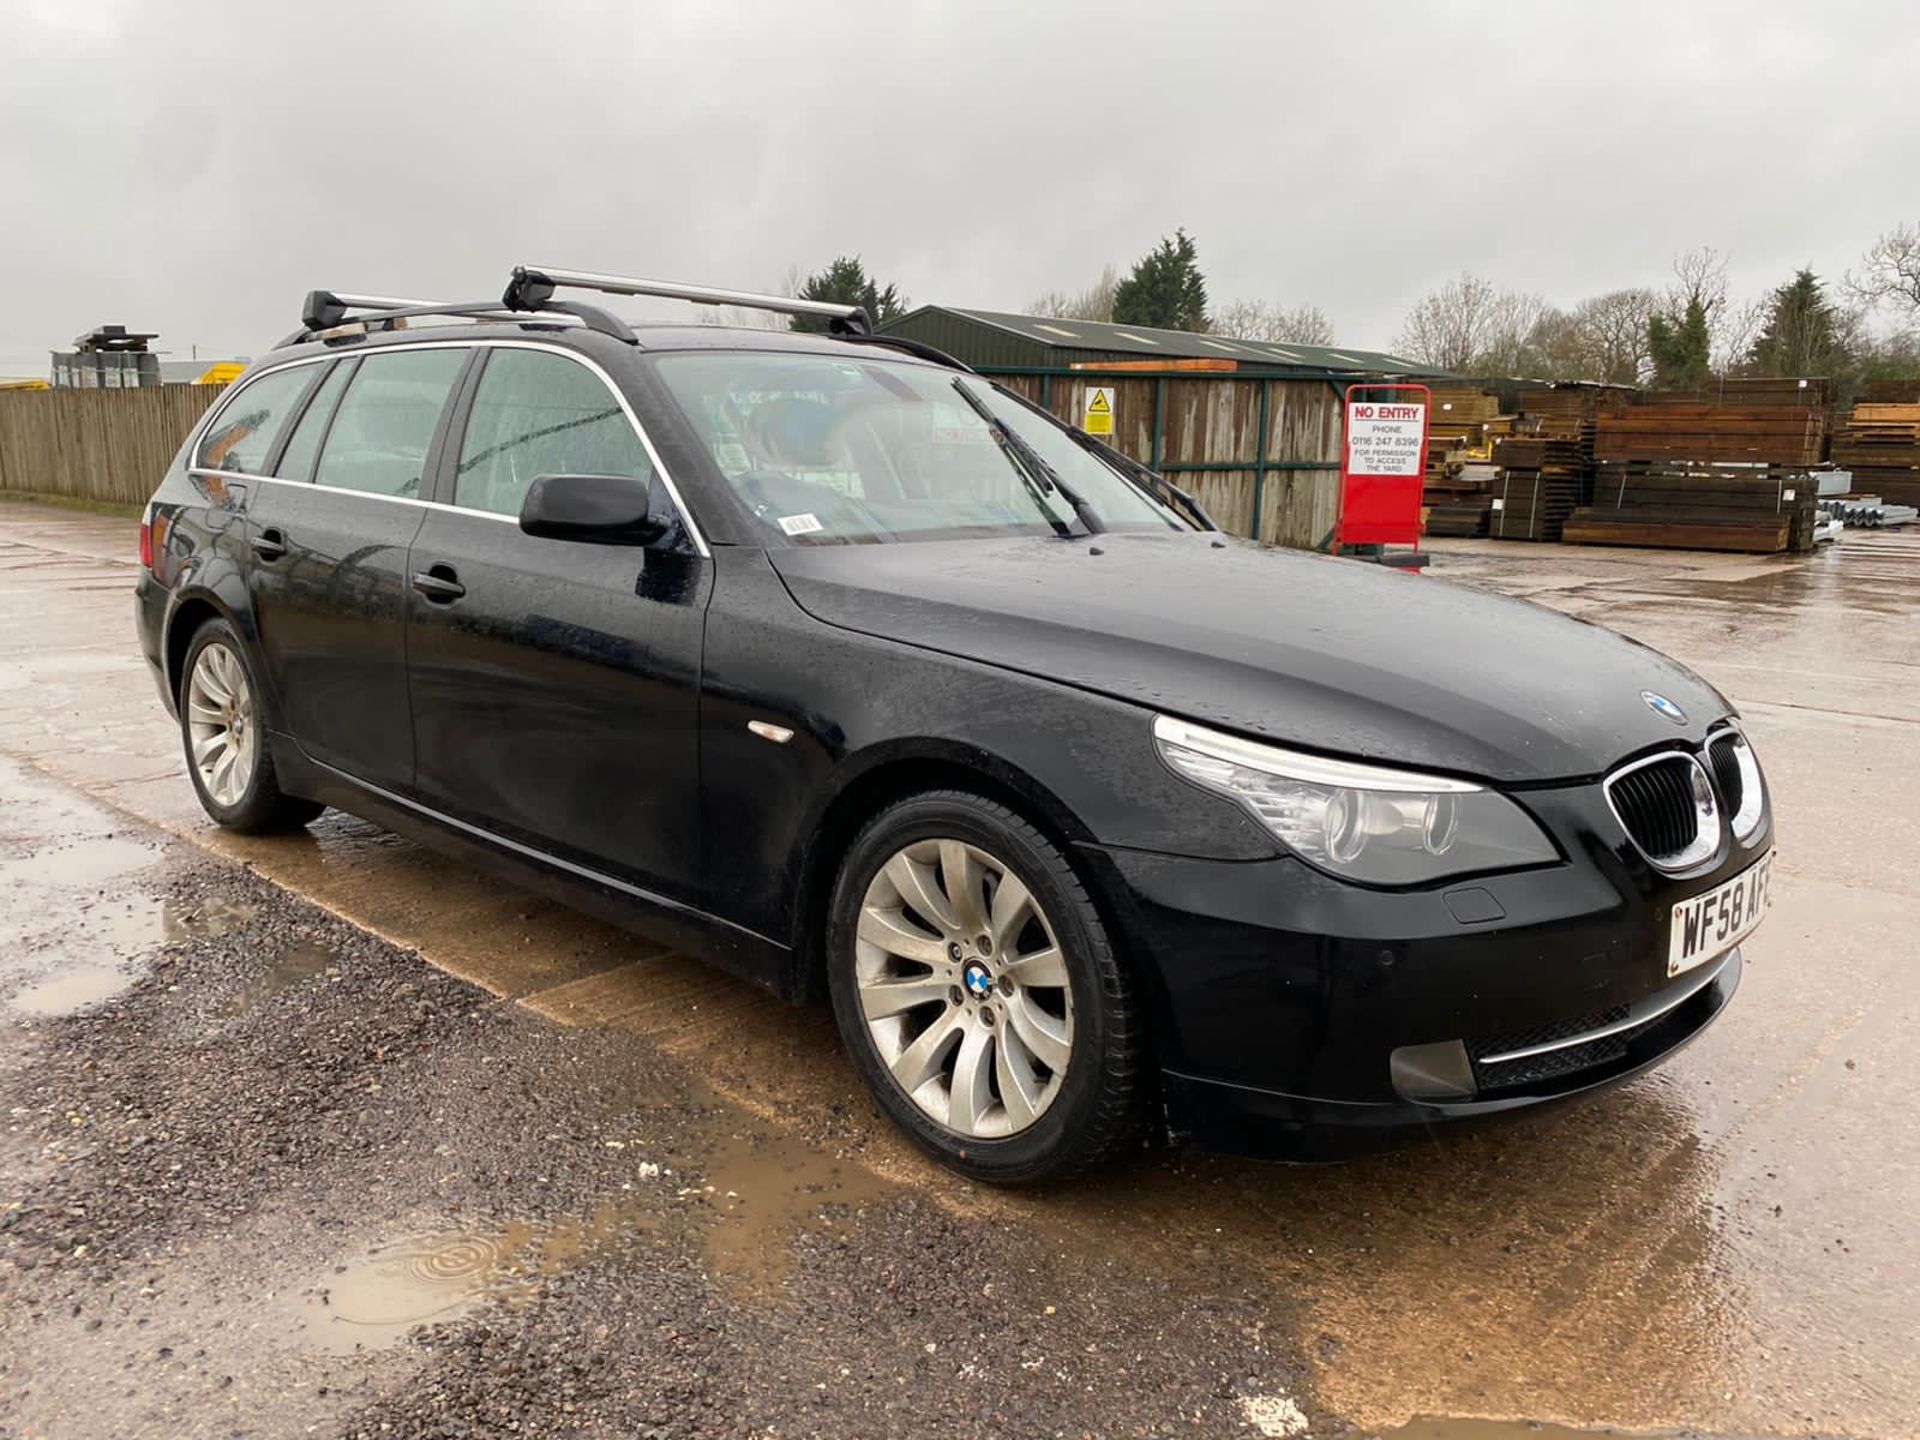 (On Sale) BMW 520d "SPECIAL EQUIPMENT" ESTATE (58 REG) HEATED SEATS- CRUISE -ELEC PACK - AC (NO VAT)